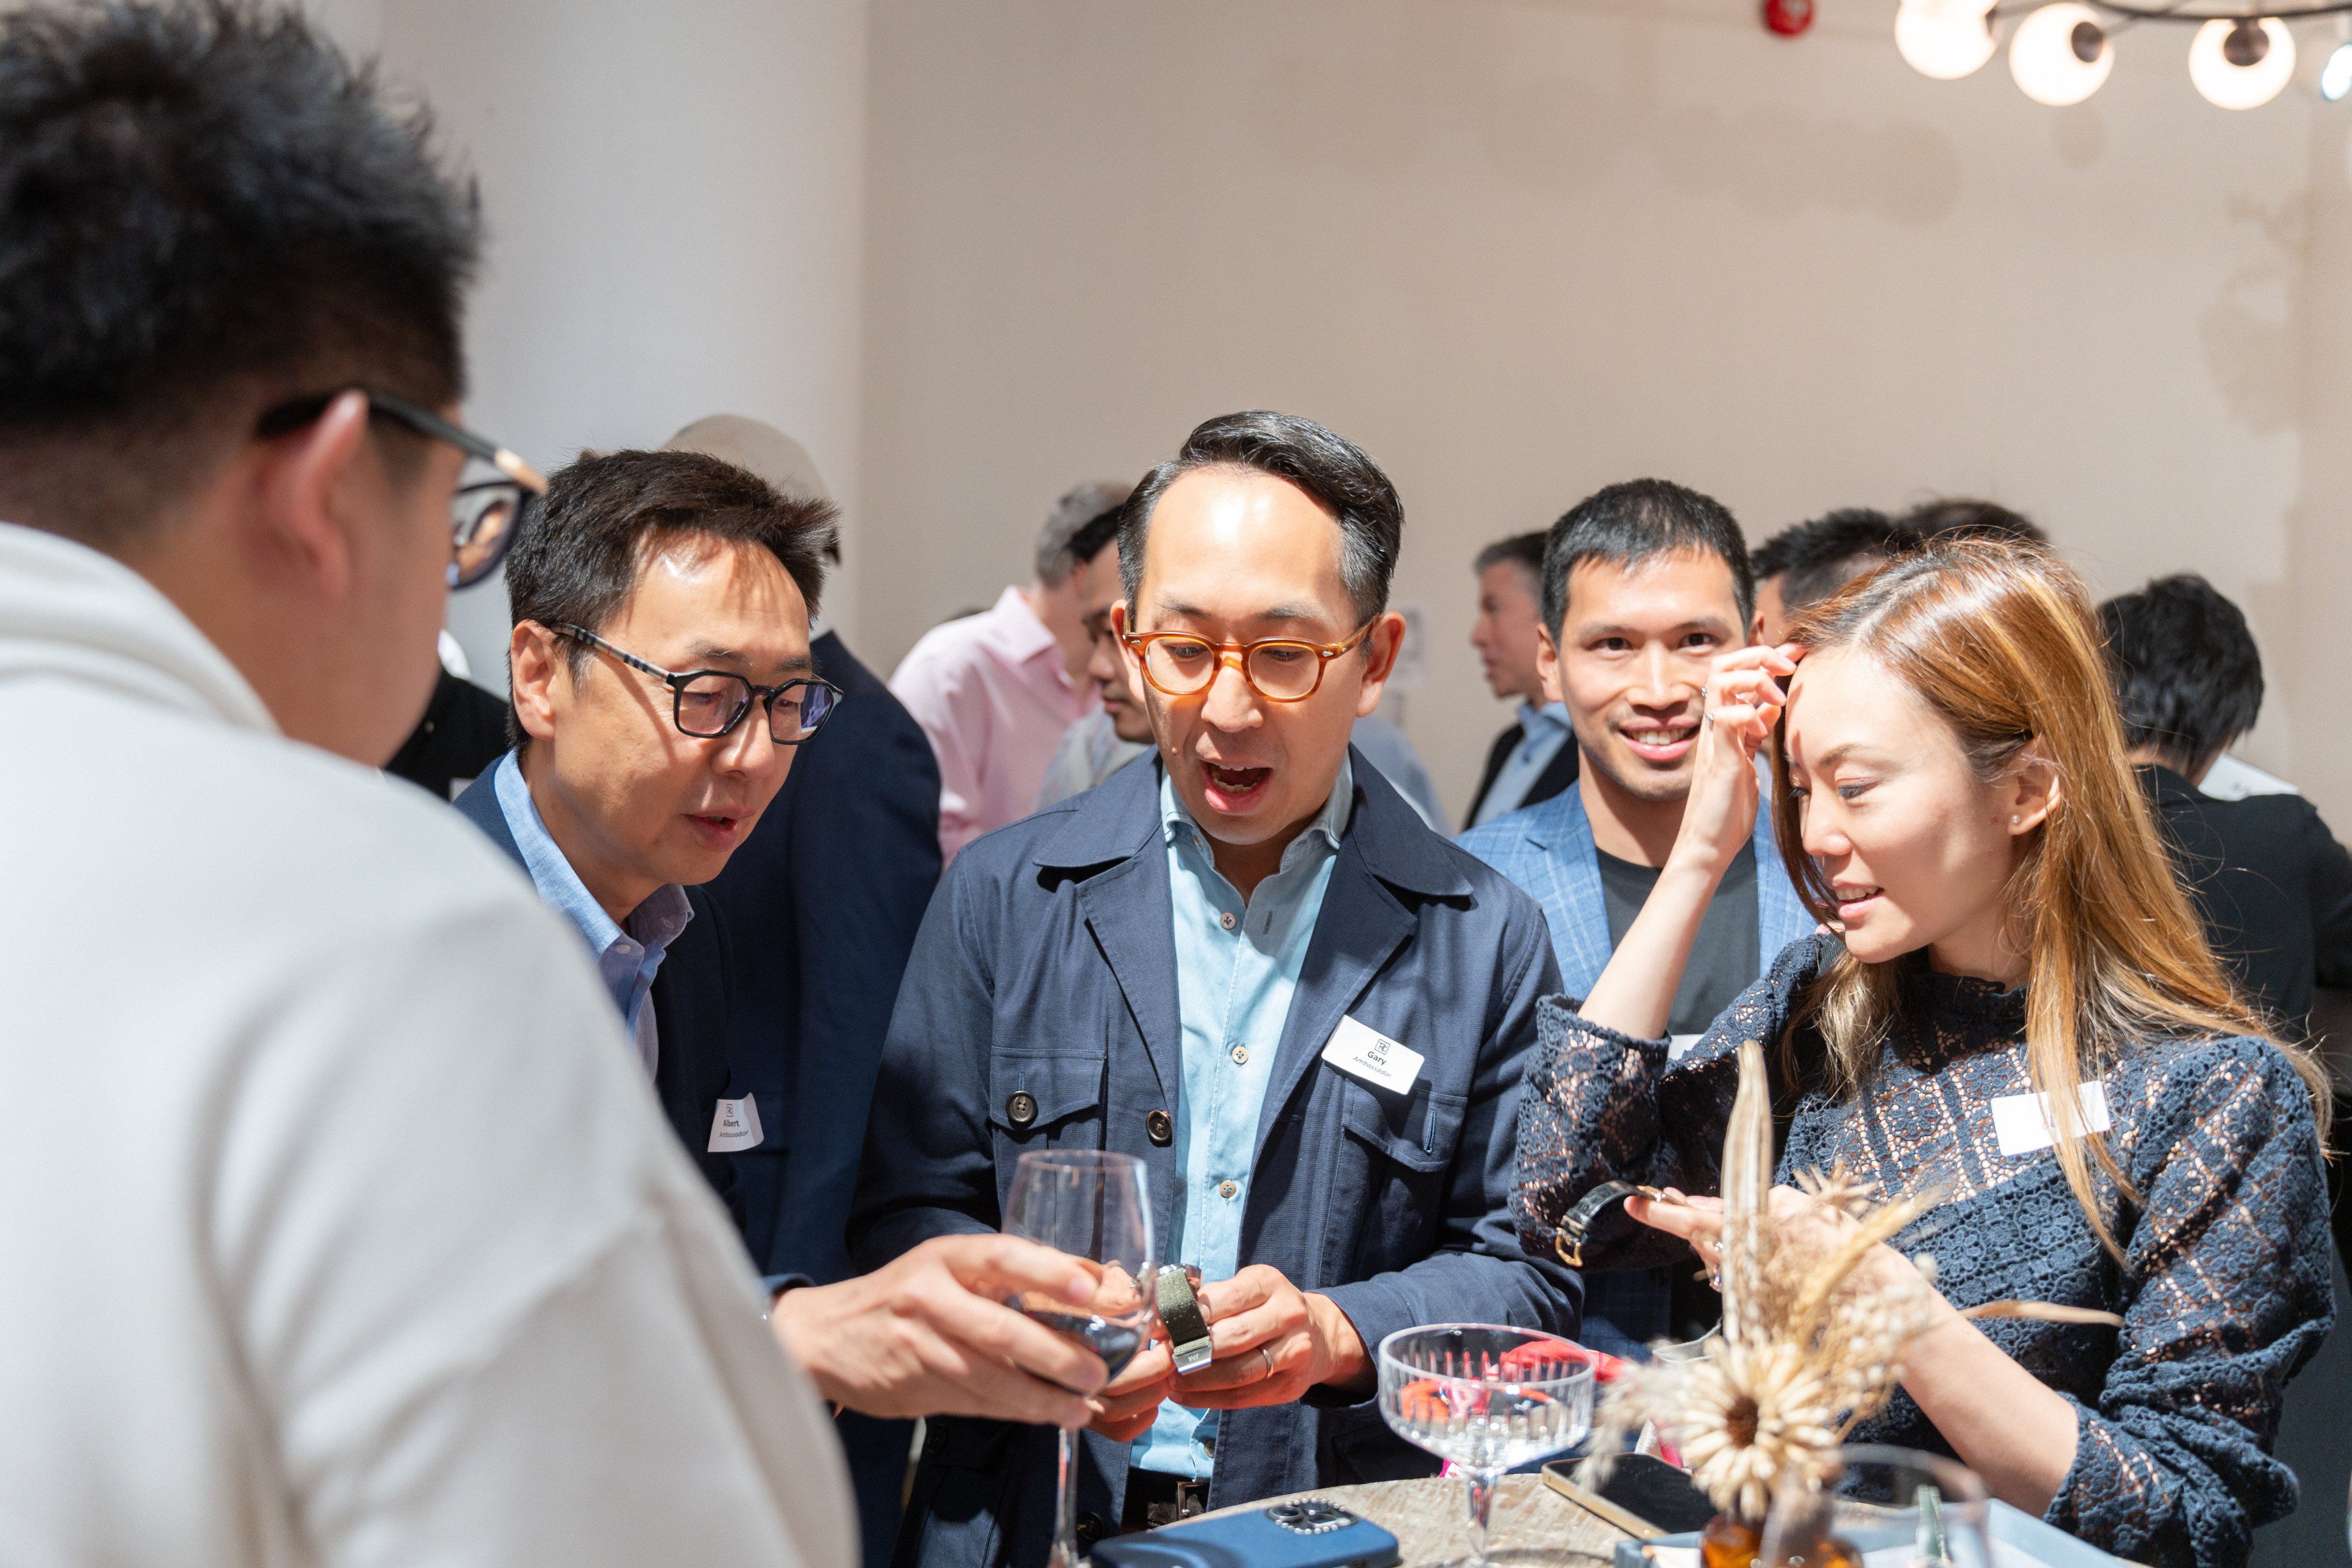 Watch collectors gather to share knowledge and admire each other’s watches at The Horology Club’s 2nd anniversary. Photo; Freeman Chiu